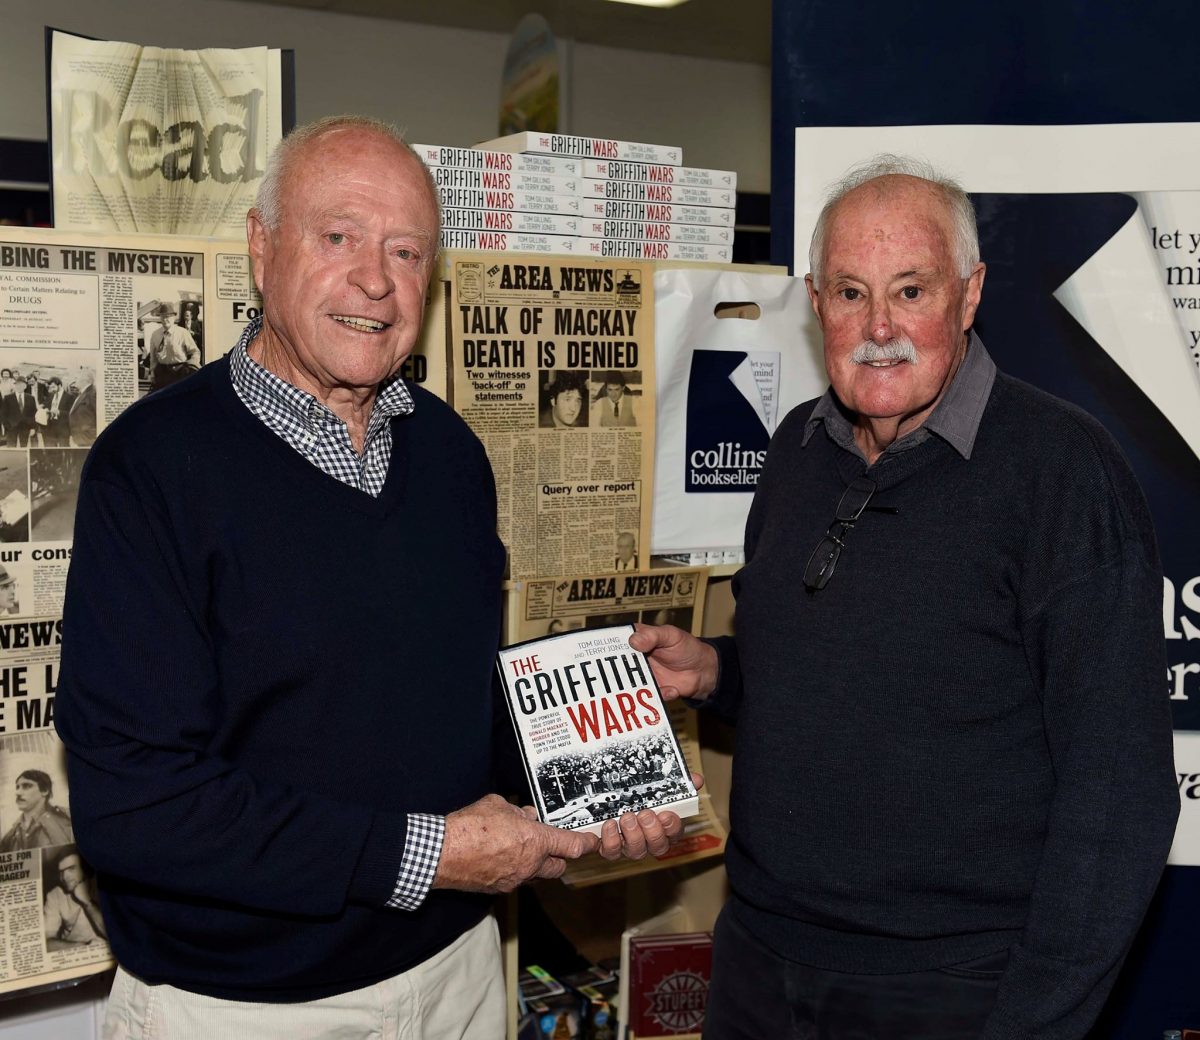 Terry Jones (right) with crime scene photographer Max Roberts and a copy of The Griffith Wars